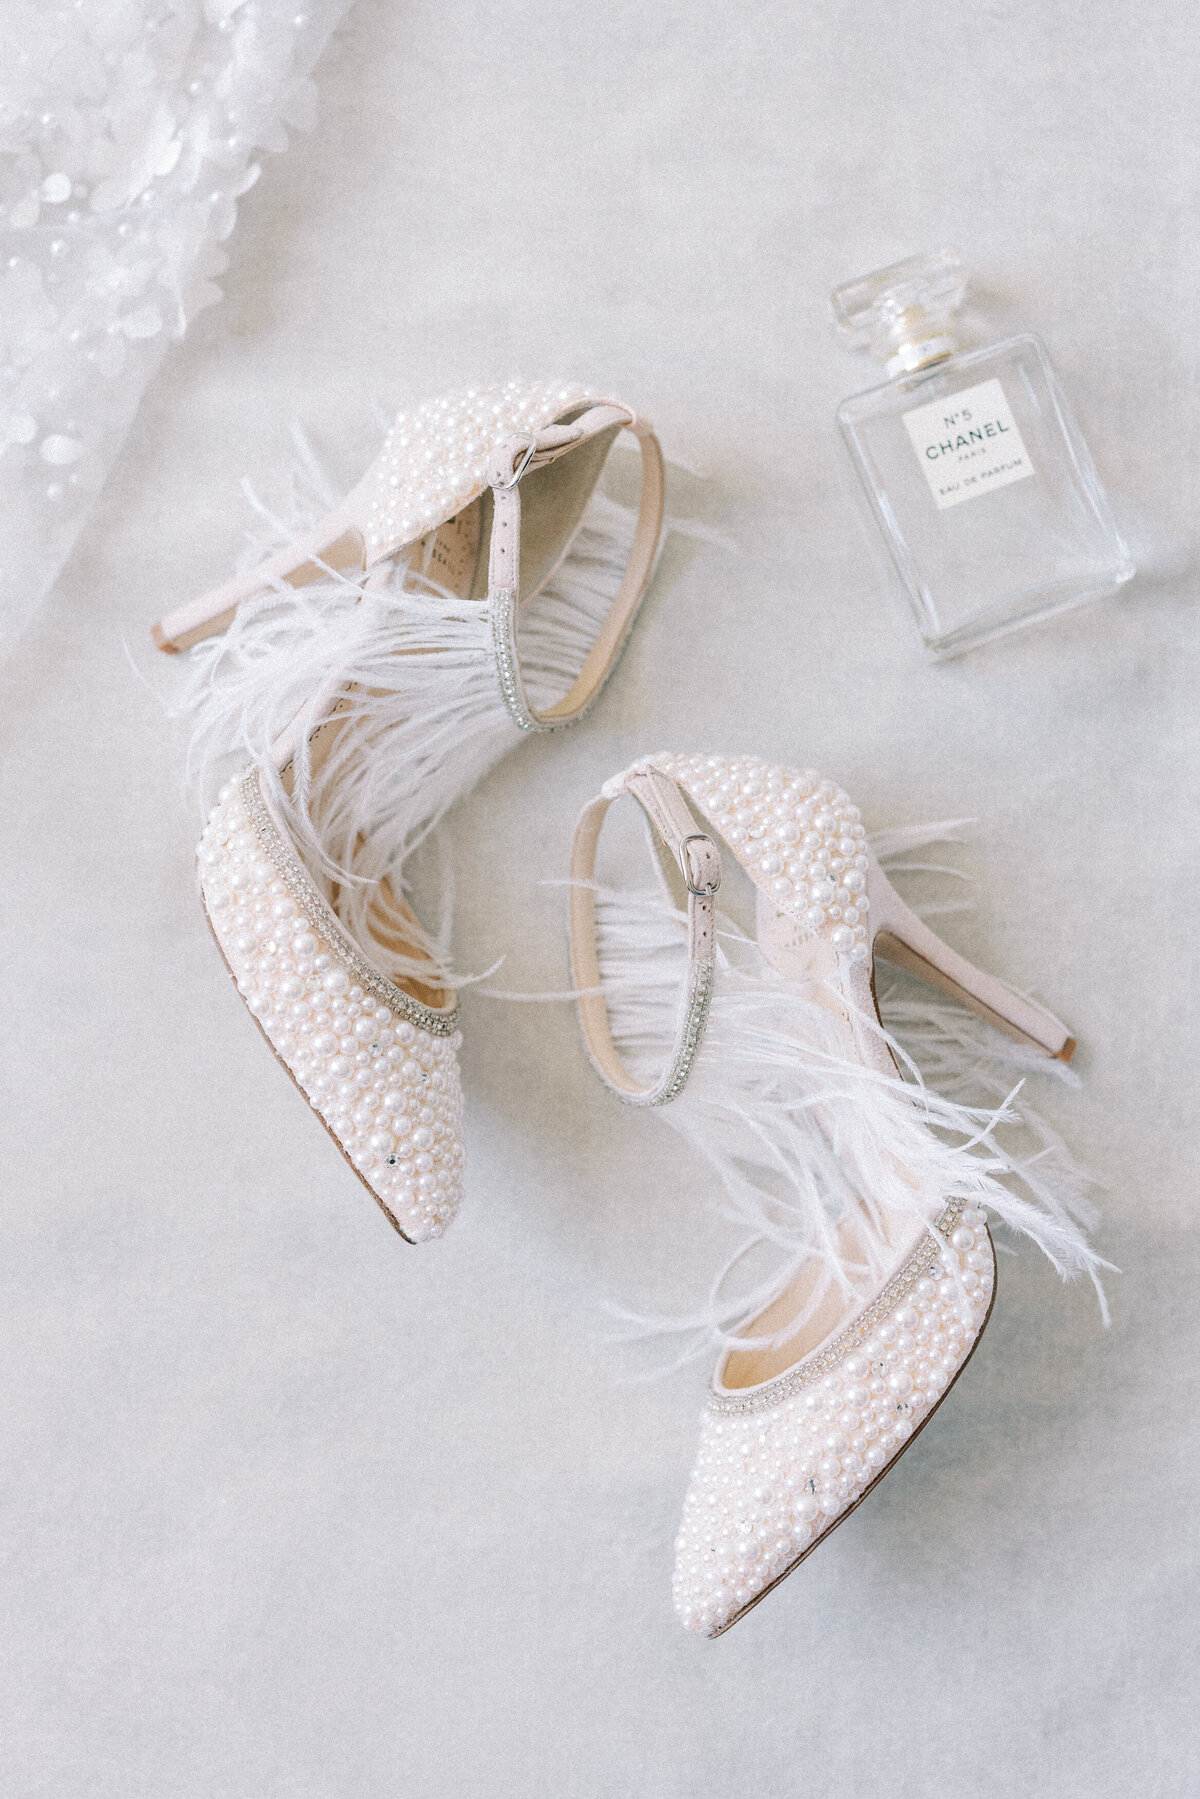 pearl wedding shoes with feathers by Bella Belle shoes